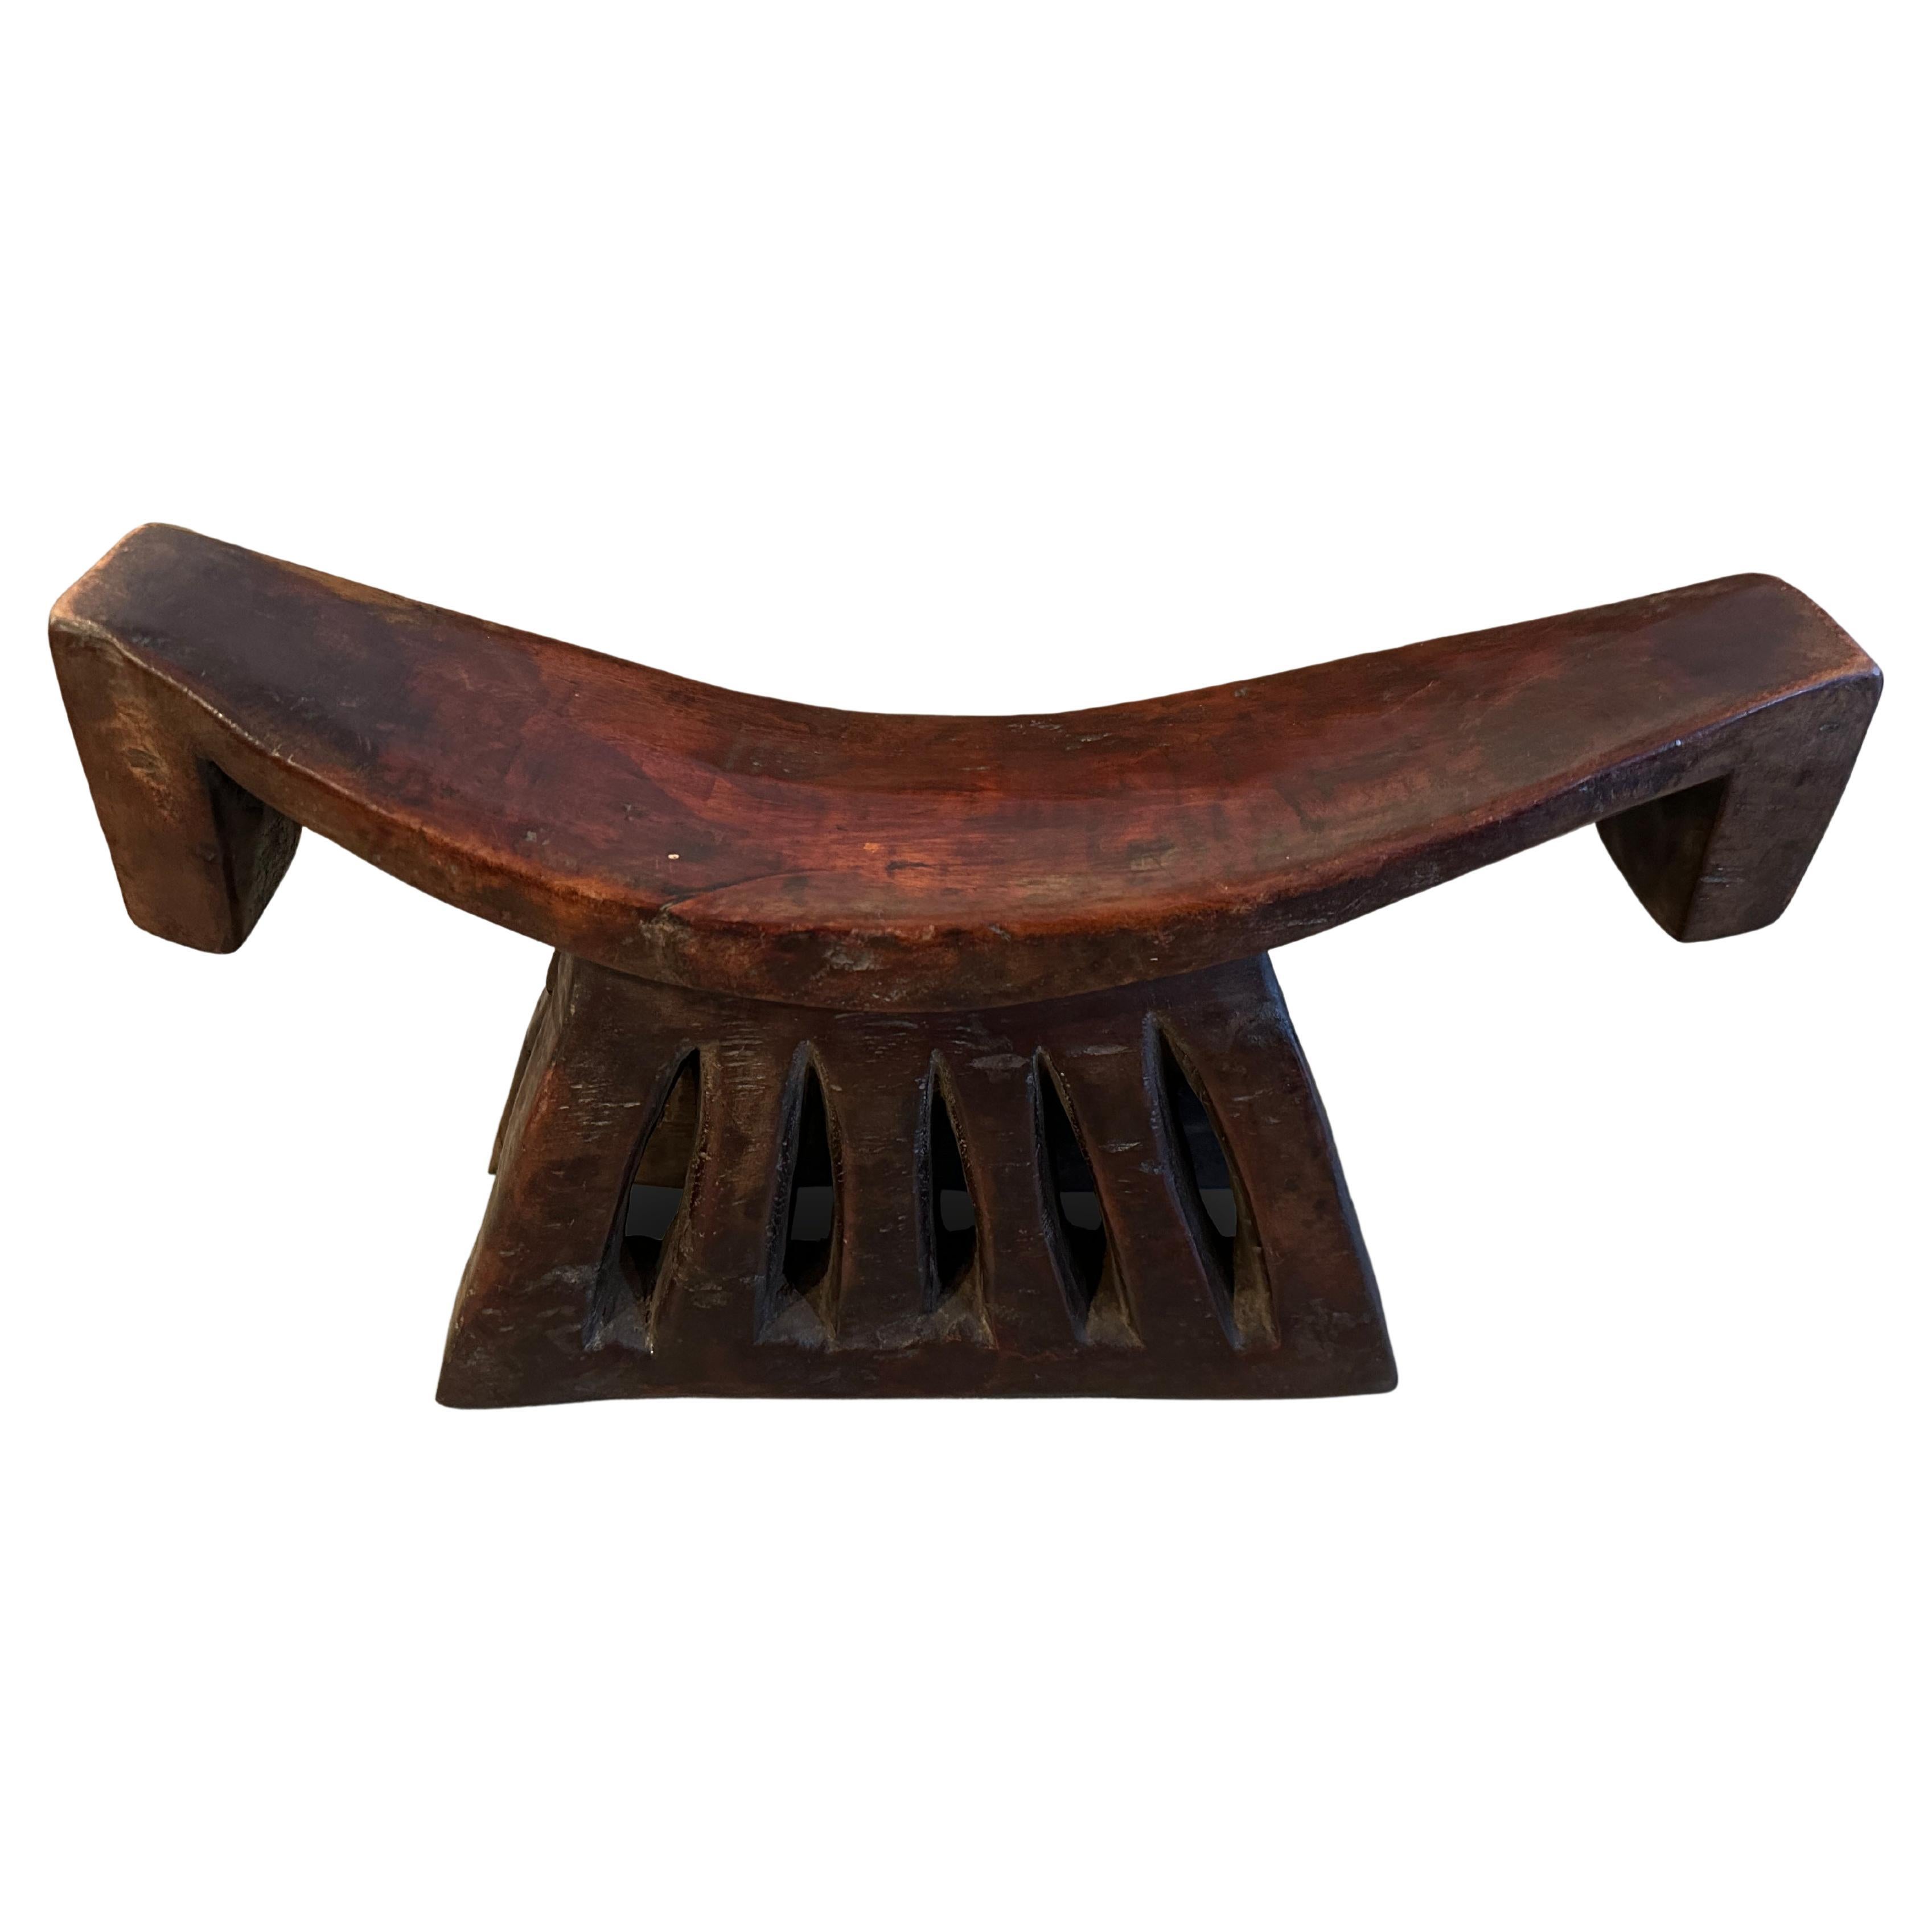 Andrianna Shamaris Antique Wooden African Head Rest For Sale